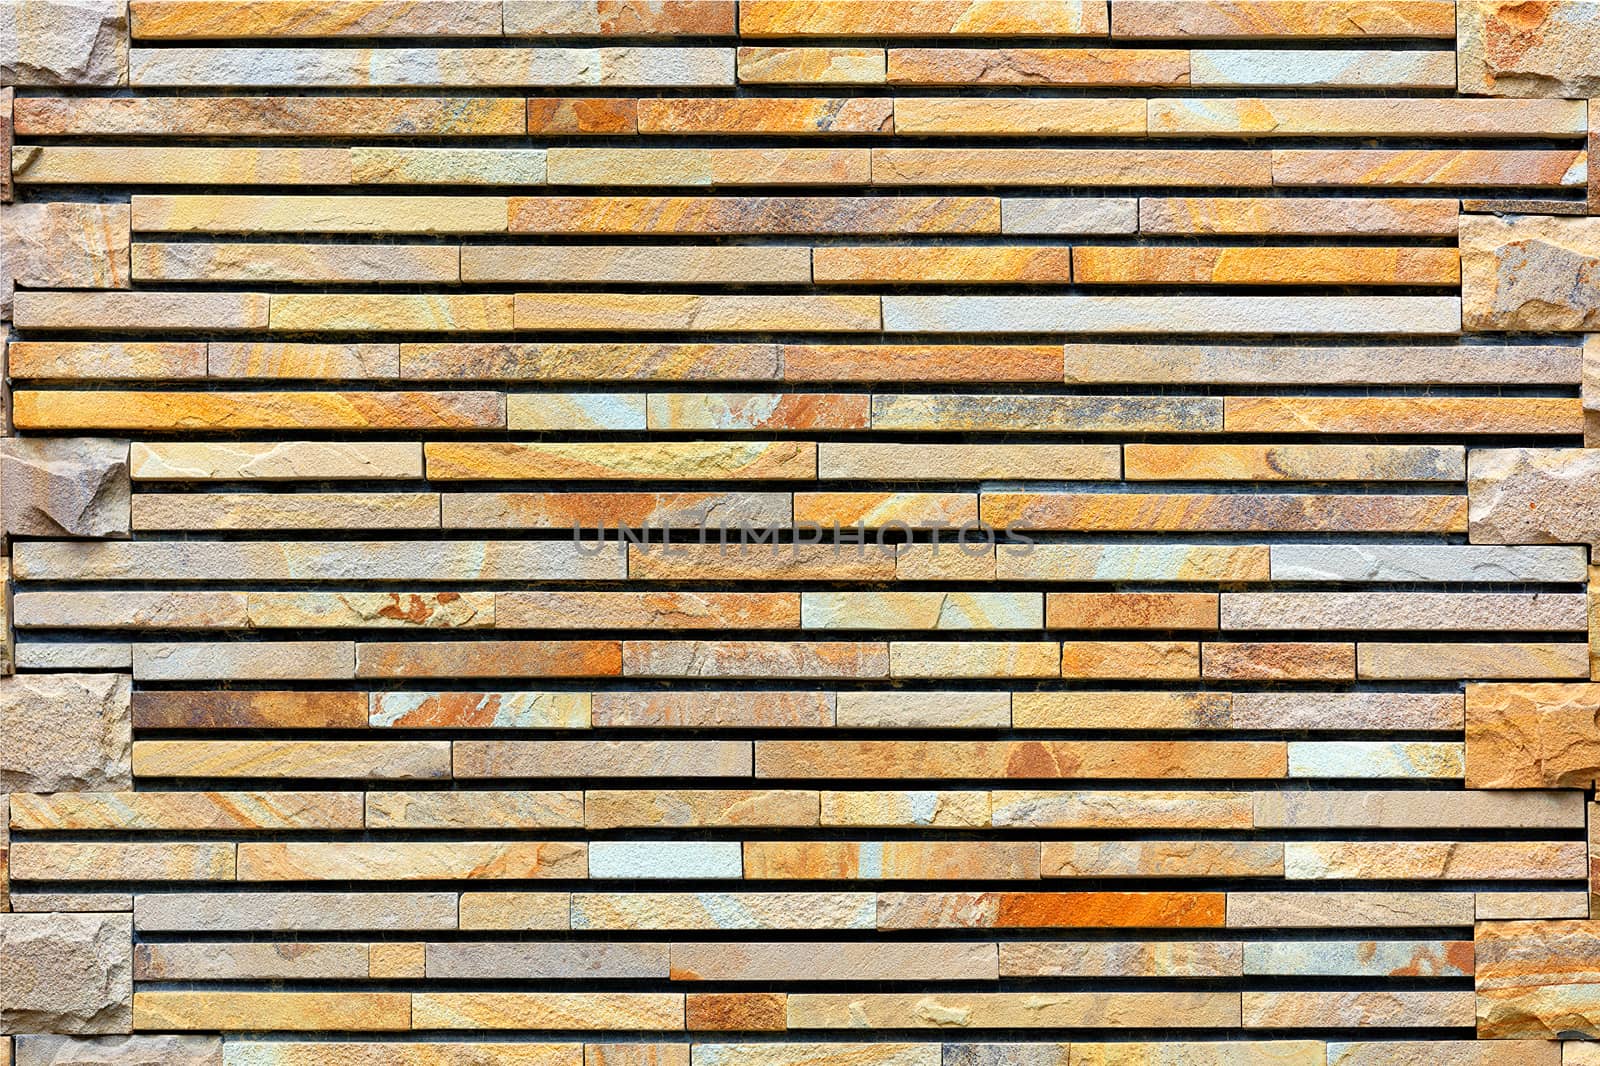 The texture and frame of the stone wall made of pieces of processed flat gold sandstone.